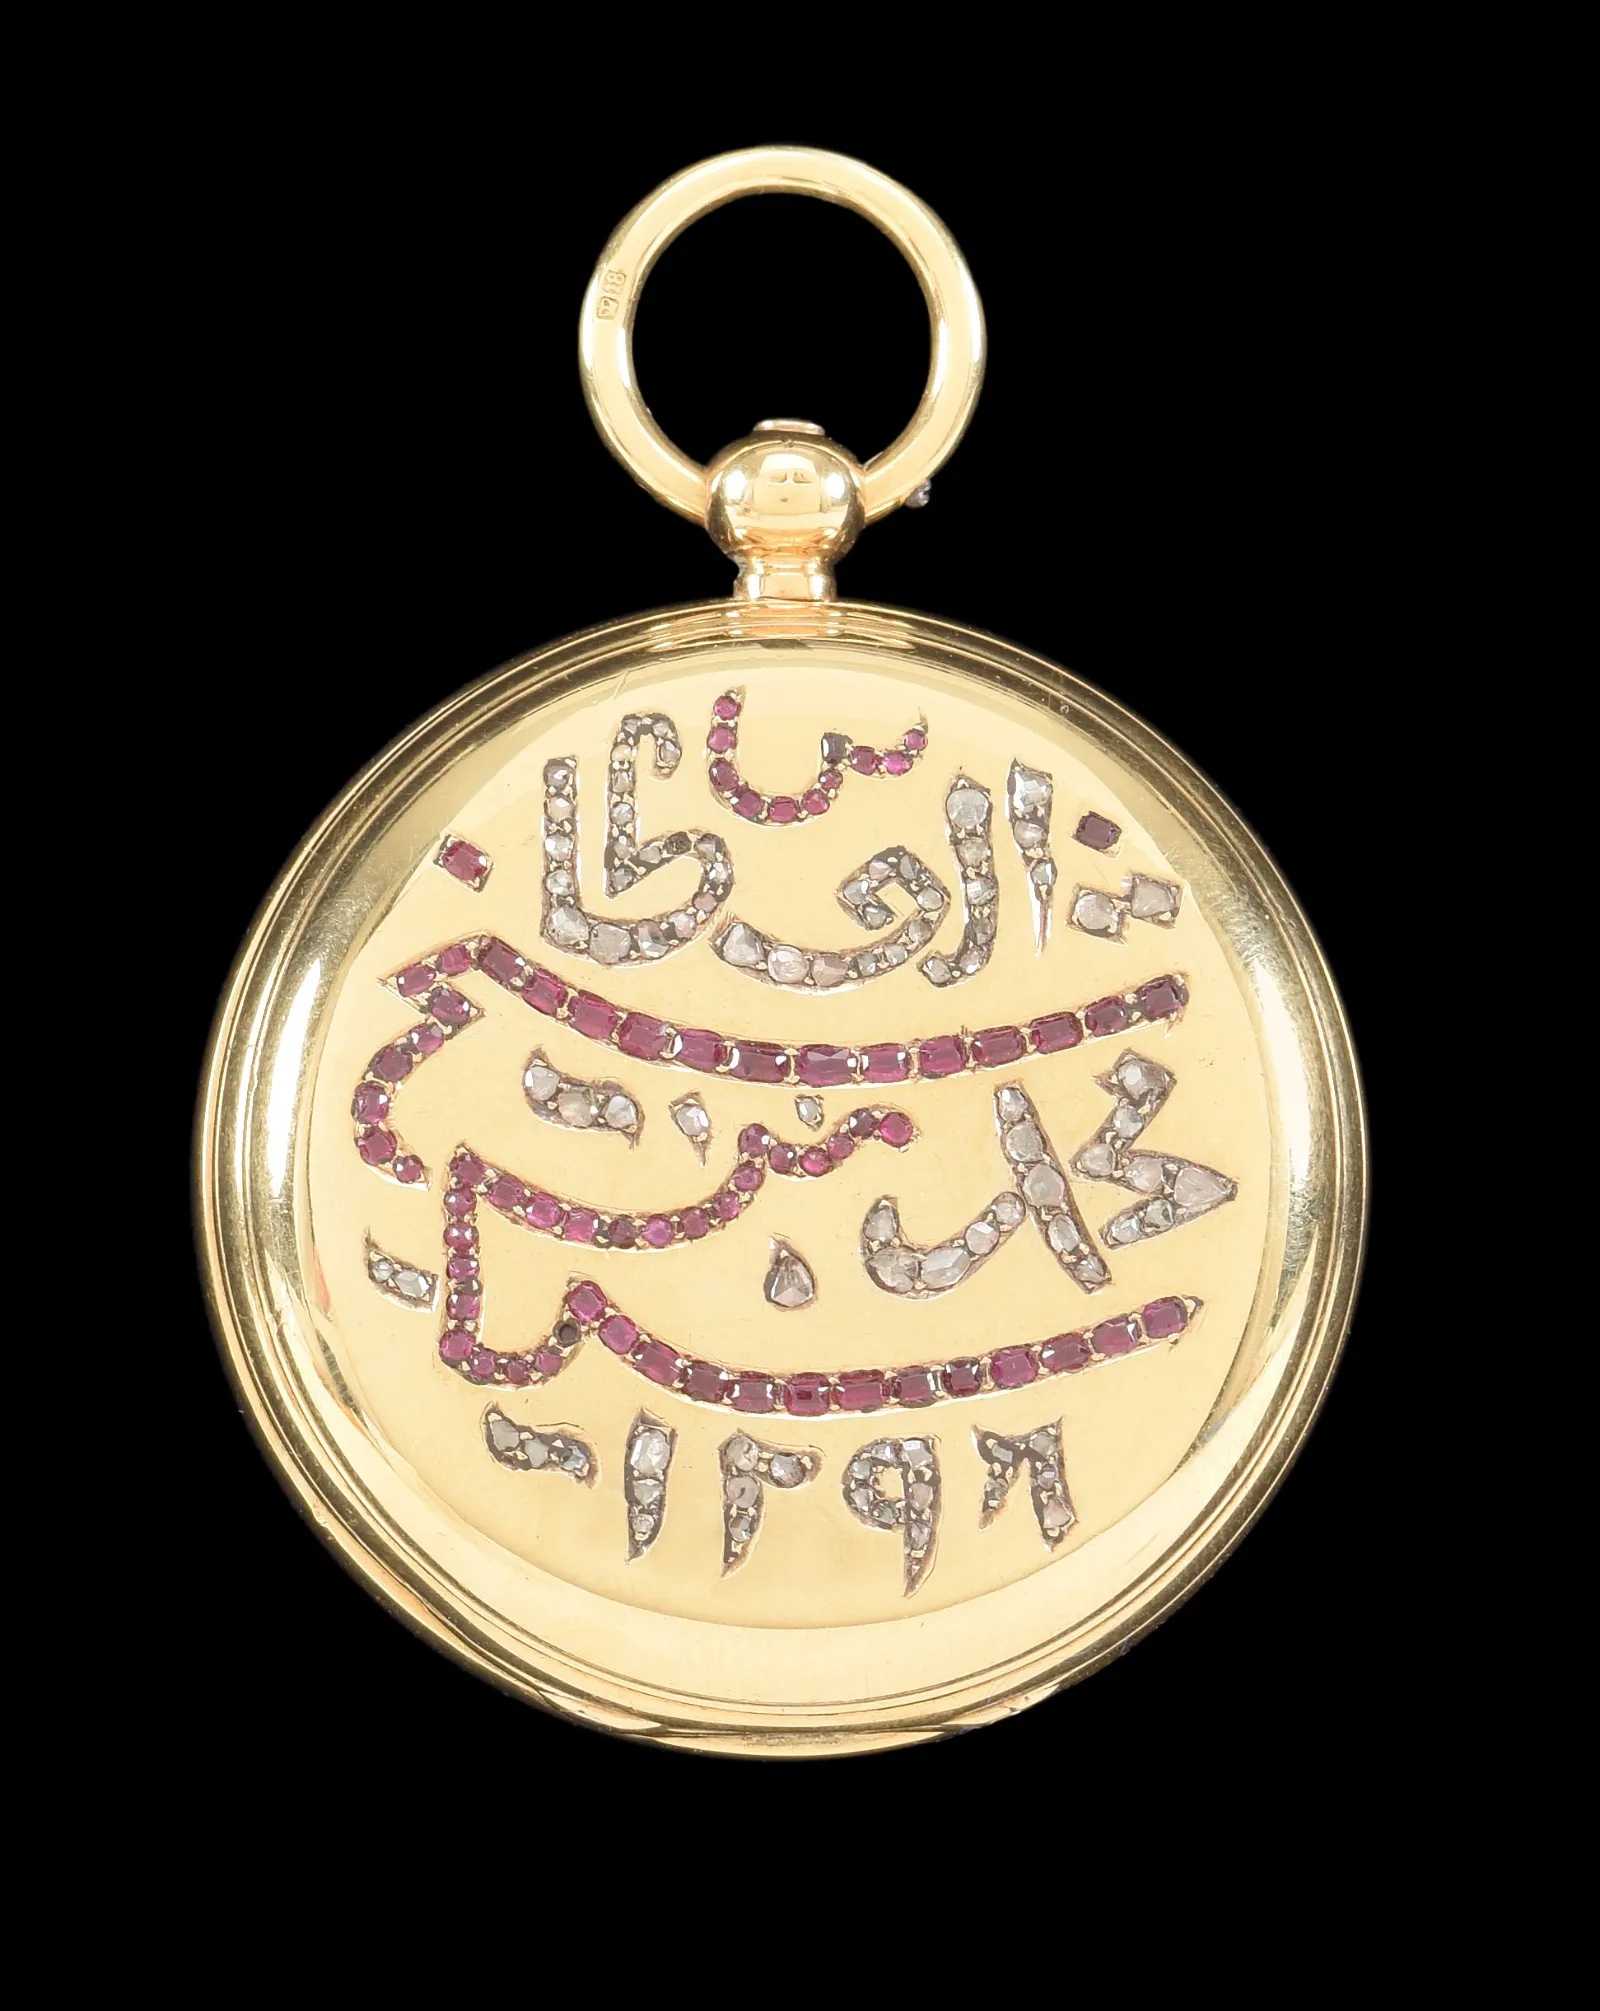 James McCabe, London Islamic trade pocket watch, estimated at $4,000-$6,000 at Tremont Auctions.